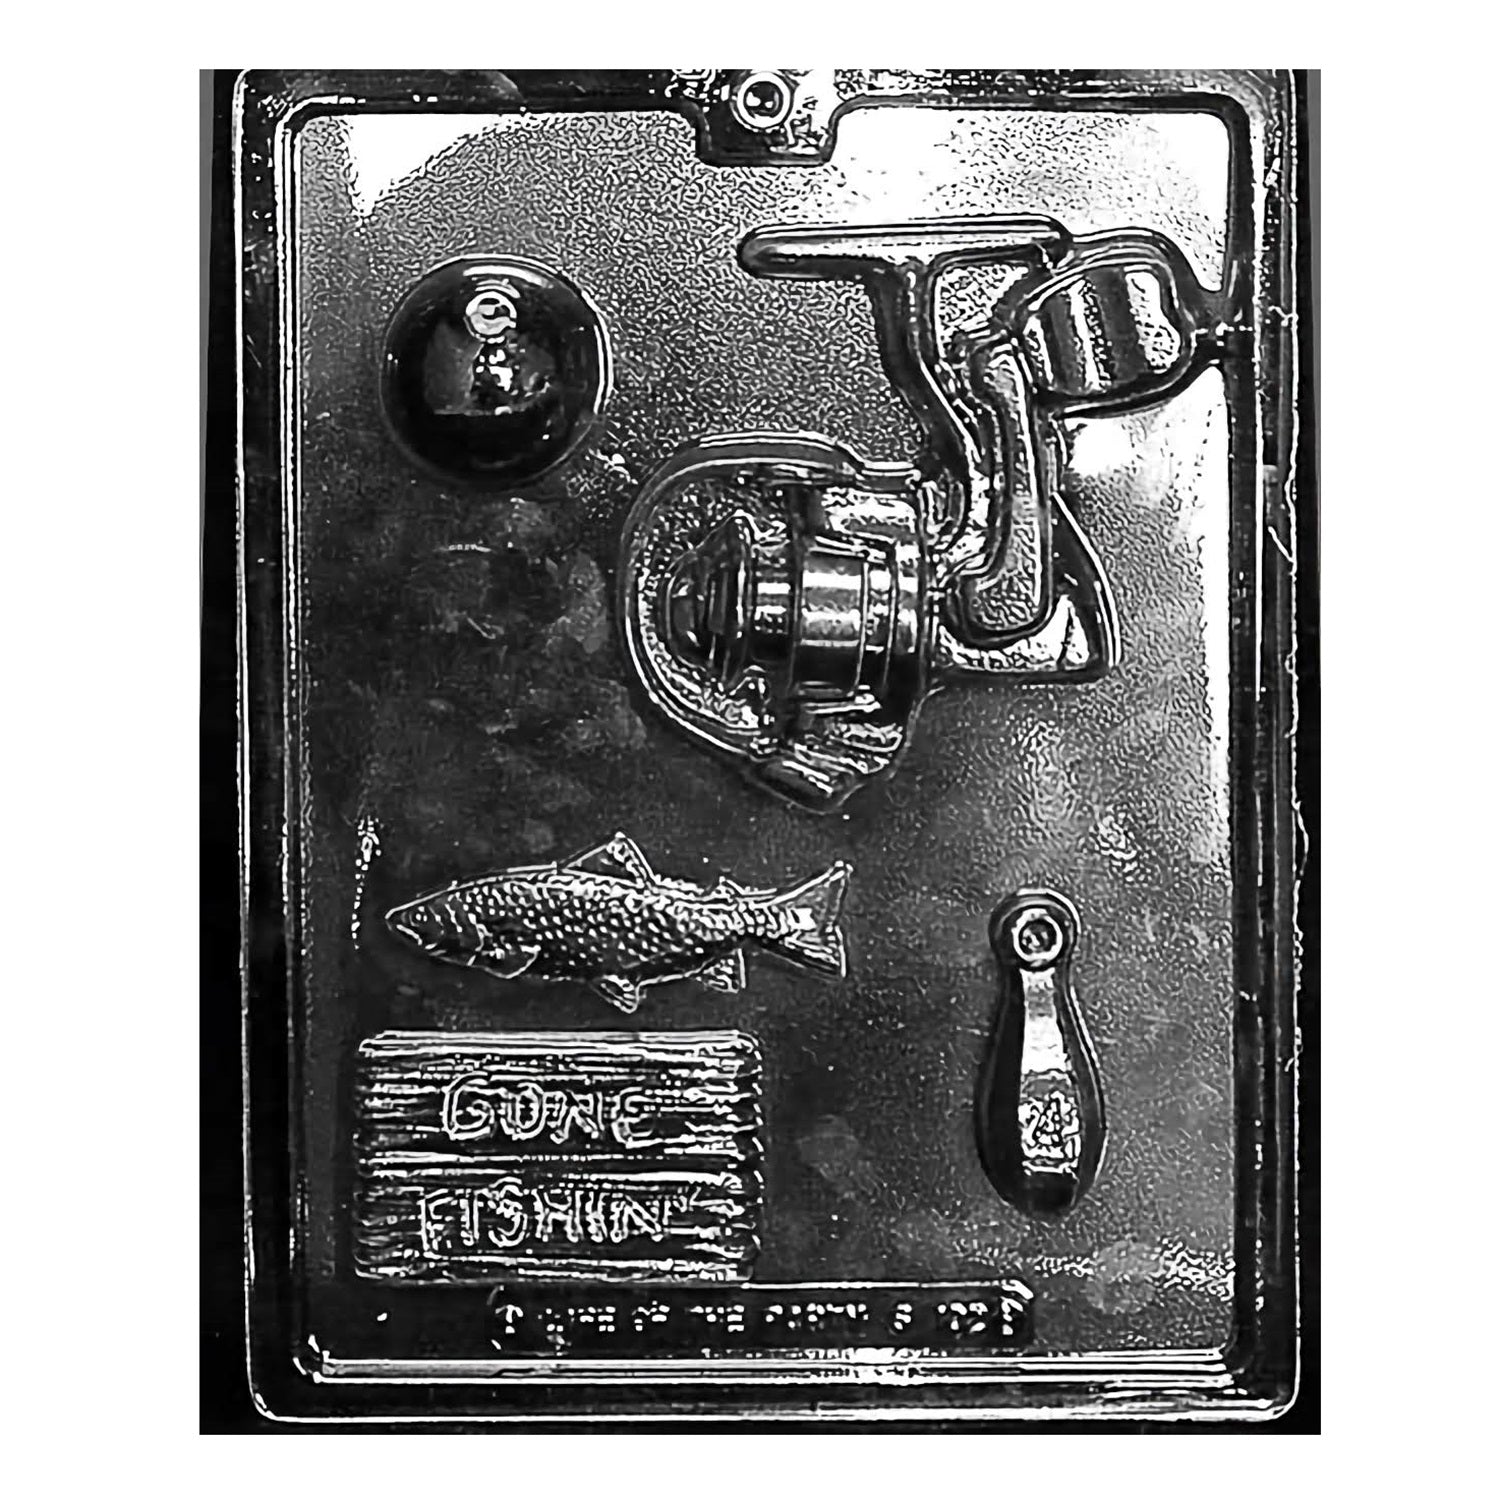 A detailed chocolate mold designed to create fishing-themed chocolates, featuring shapes of fish, fishing reels, baits, and a 'Gone Fishing' sign, perfect for anglers and outdoor enthusiasts.